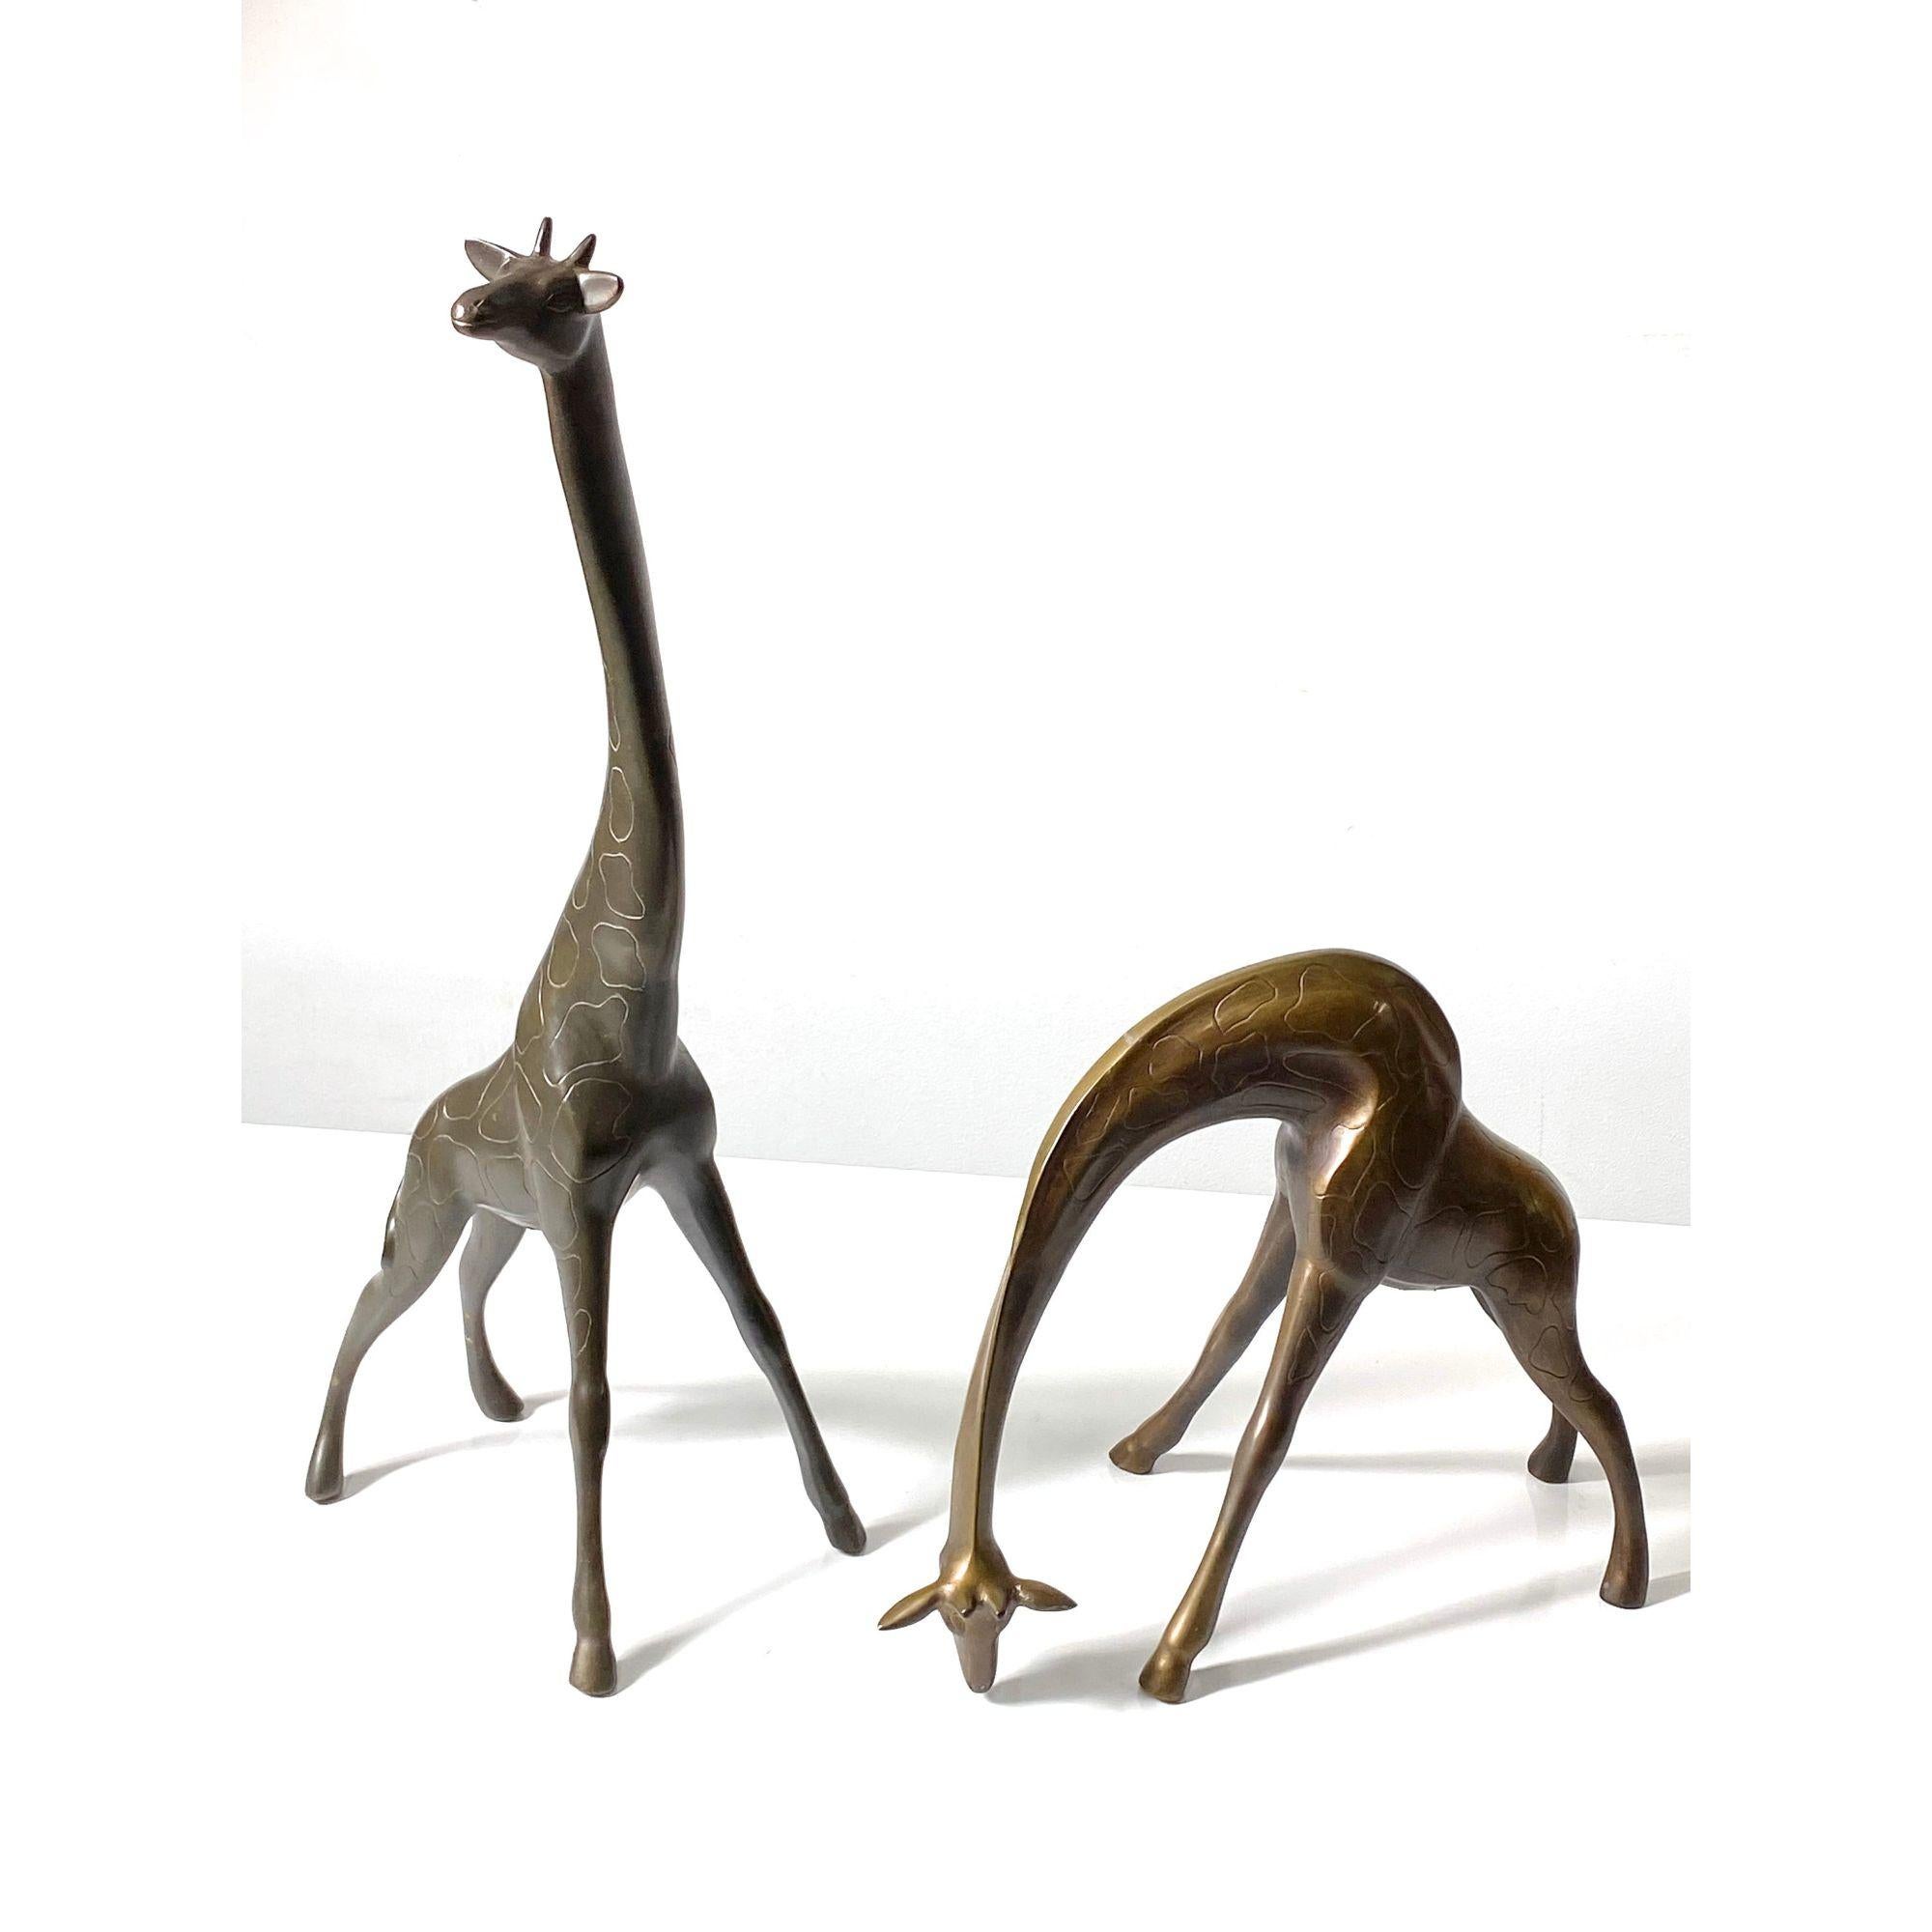 Modern Pair of Vintage Giraffe Sculptures in Bronze and Brass, circa 1970s For Sale